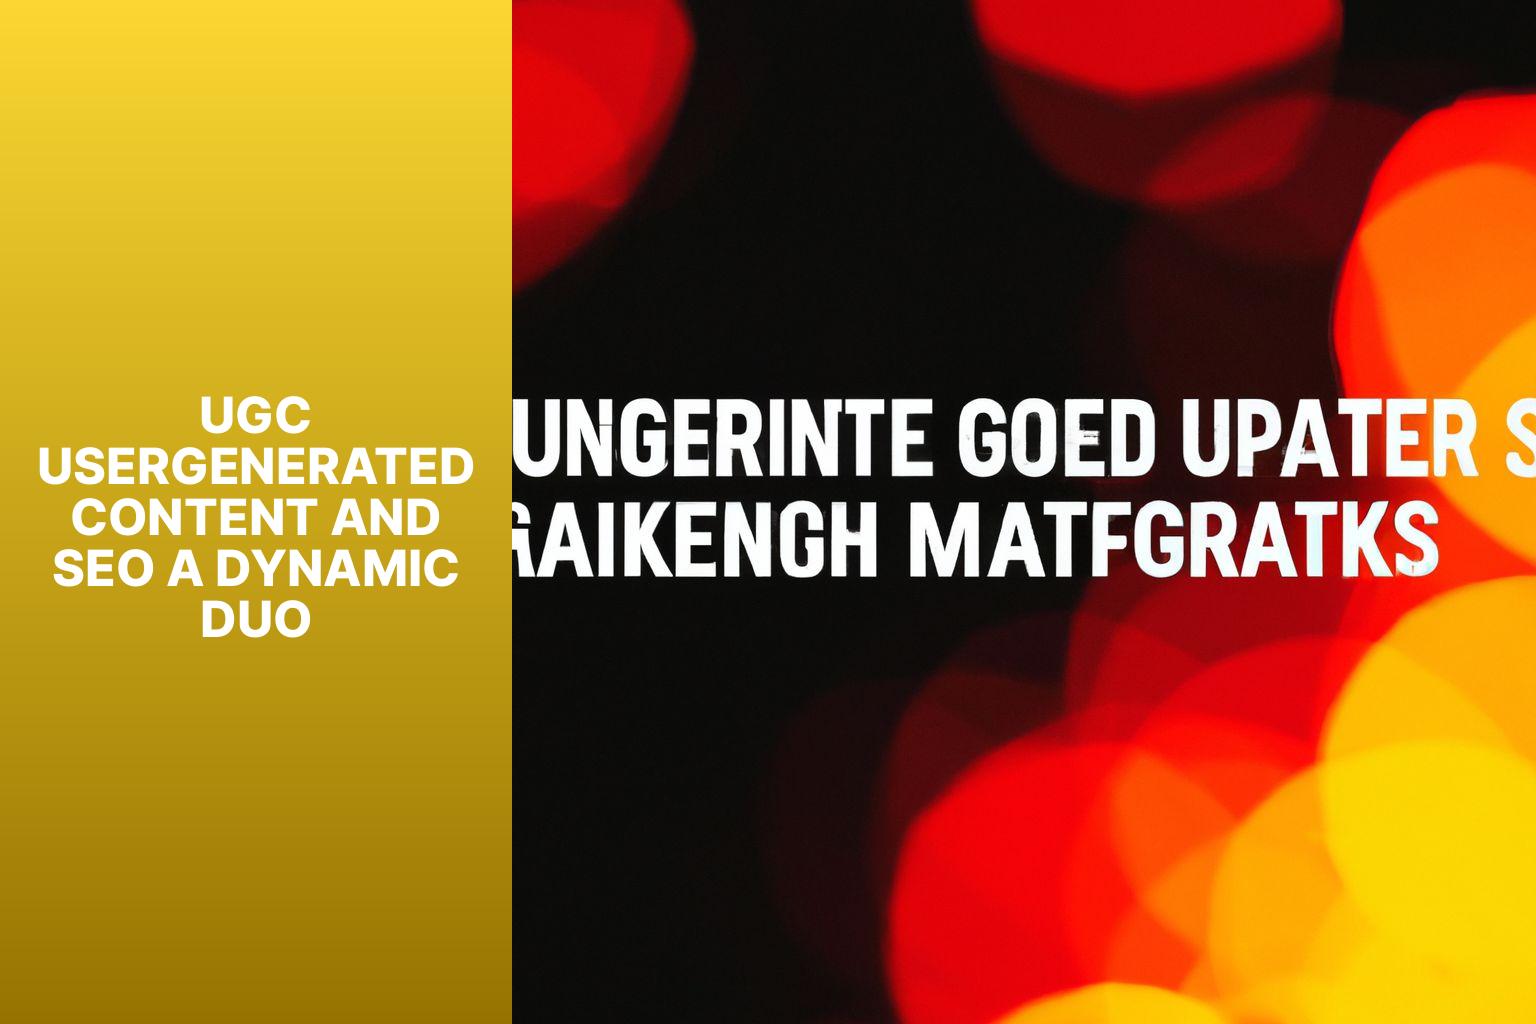 UGC UserGenerated Content and SEO A Dynamic Duo